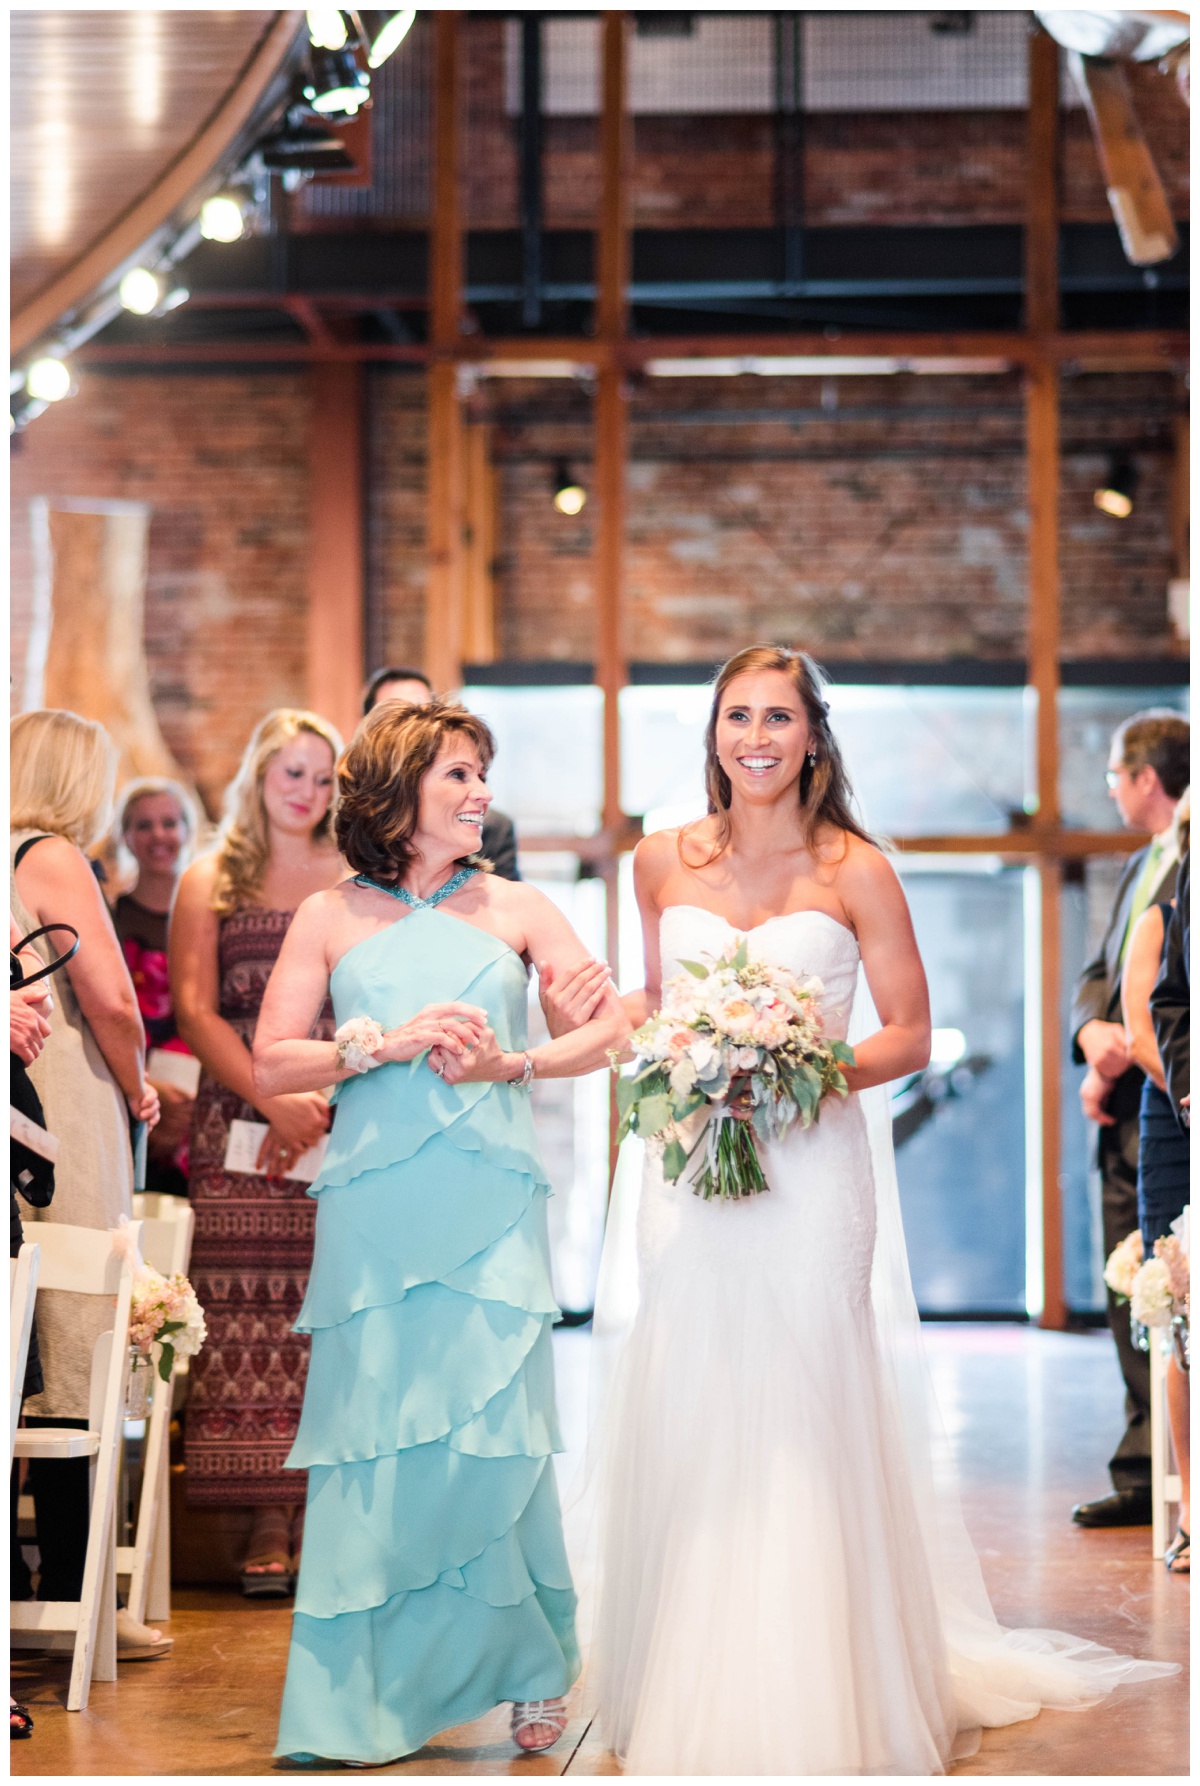 american visionary art museum wedding in baltimore maryland by richmond wedding photographer sarah & dave photography pink coral peach wedding colors summer wedding bride walking down aisle with mother looking at her daughter holding arms